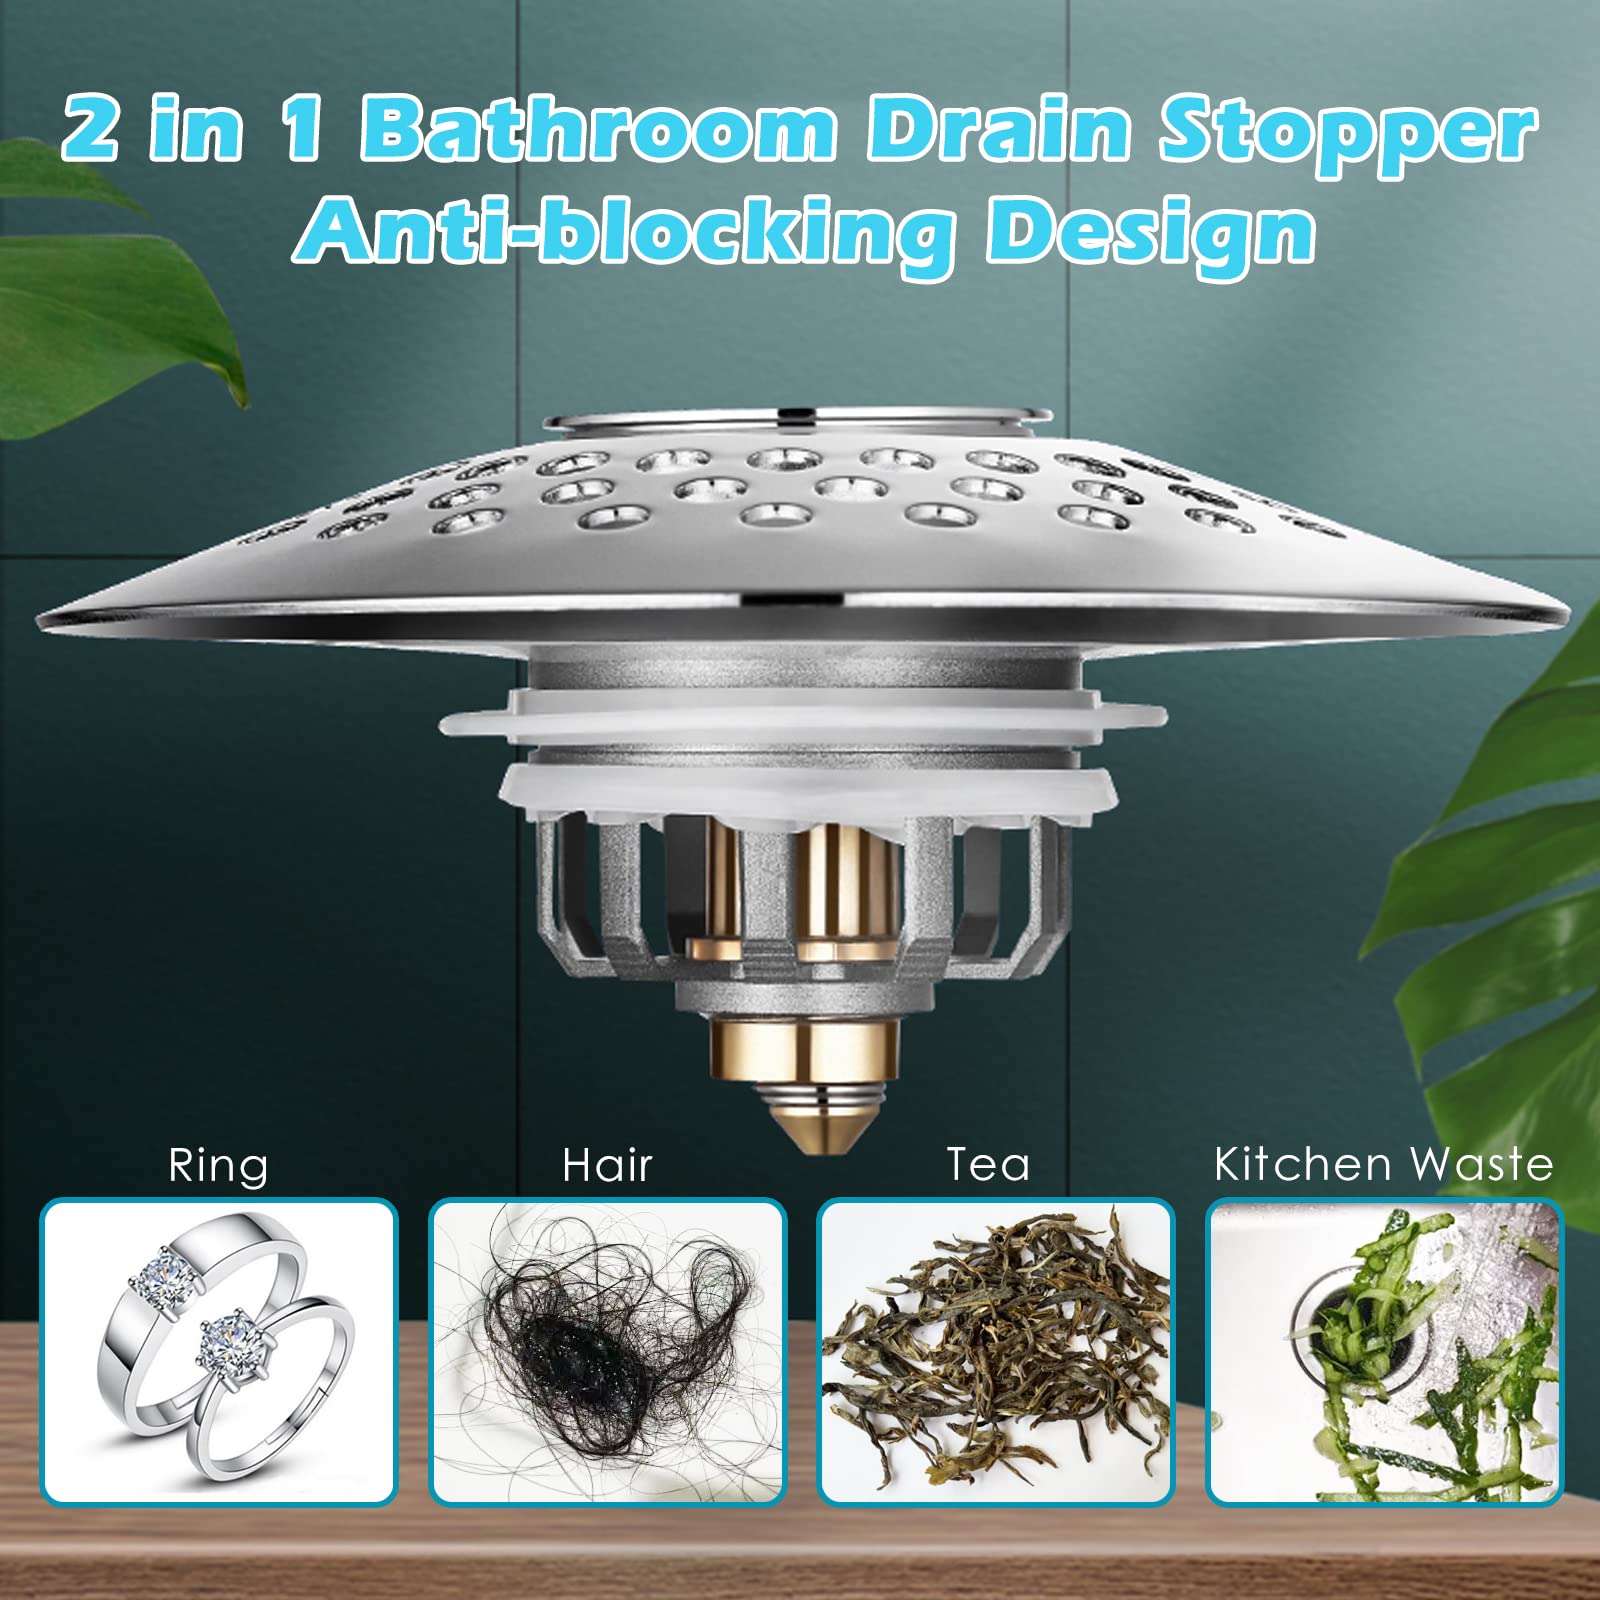 Universal Bathtub Stopper for 1.3-1.6”, Tub Drain Stoppers with Shower Drain Hair Catcher, Upgraded Brass Bathroom Basin Pop-Up Bath Tub Stopper Drain Cover Plug, Anti Clogging Bathroom Drain Strainer